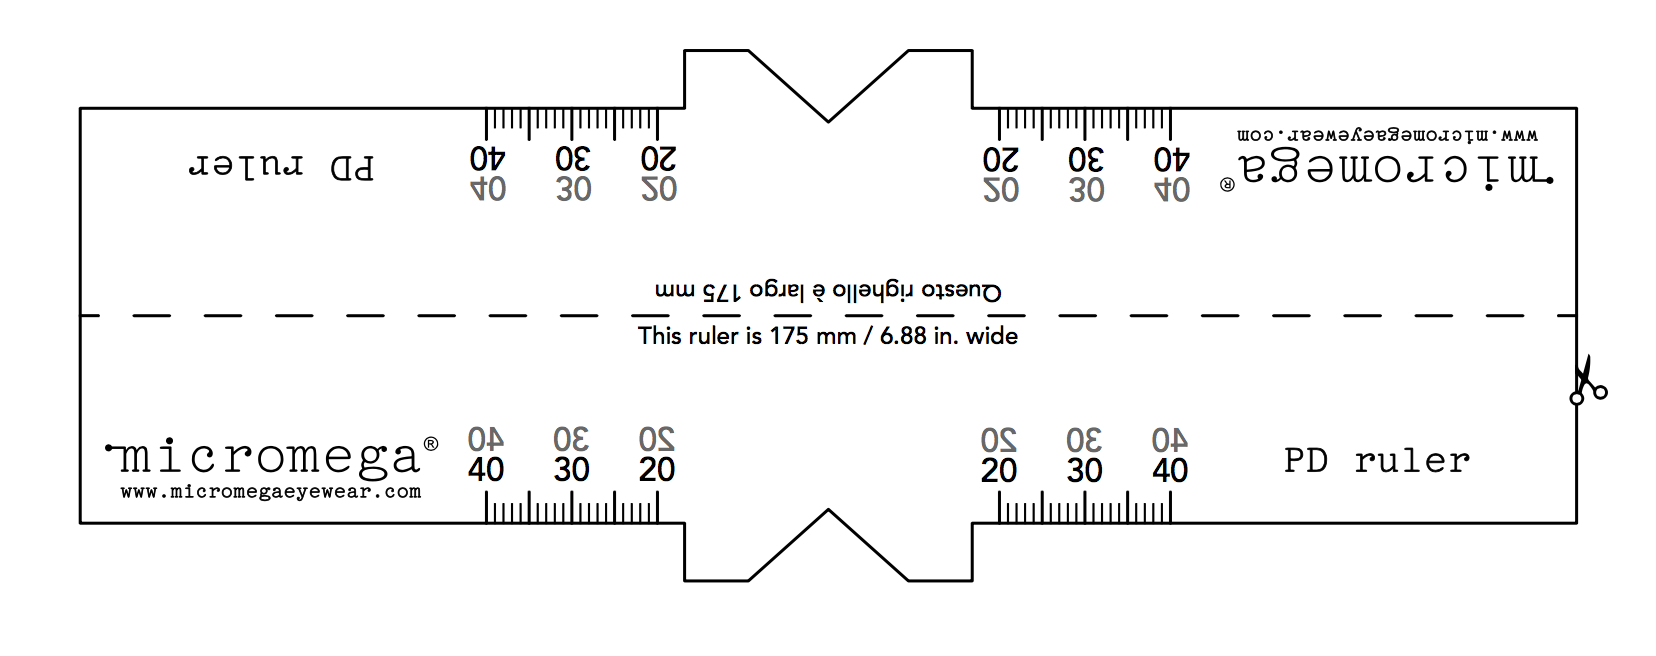 Pupillary Distance Ruler Print Out Printable Ruler Actual Size